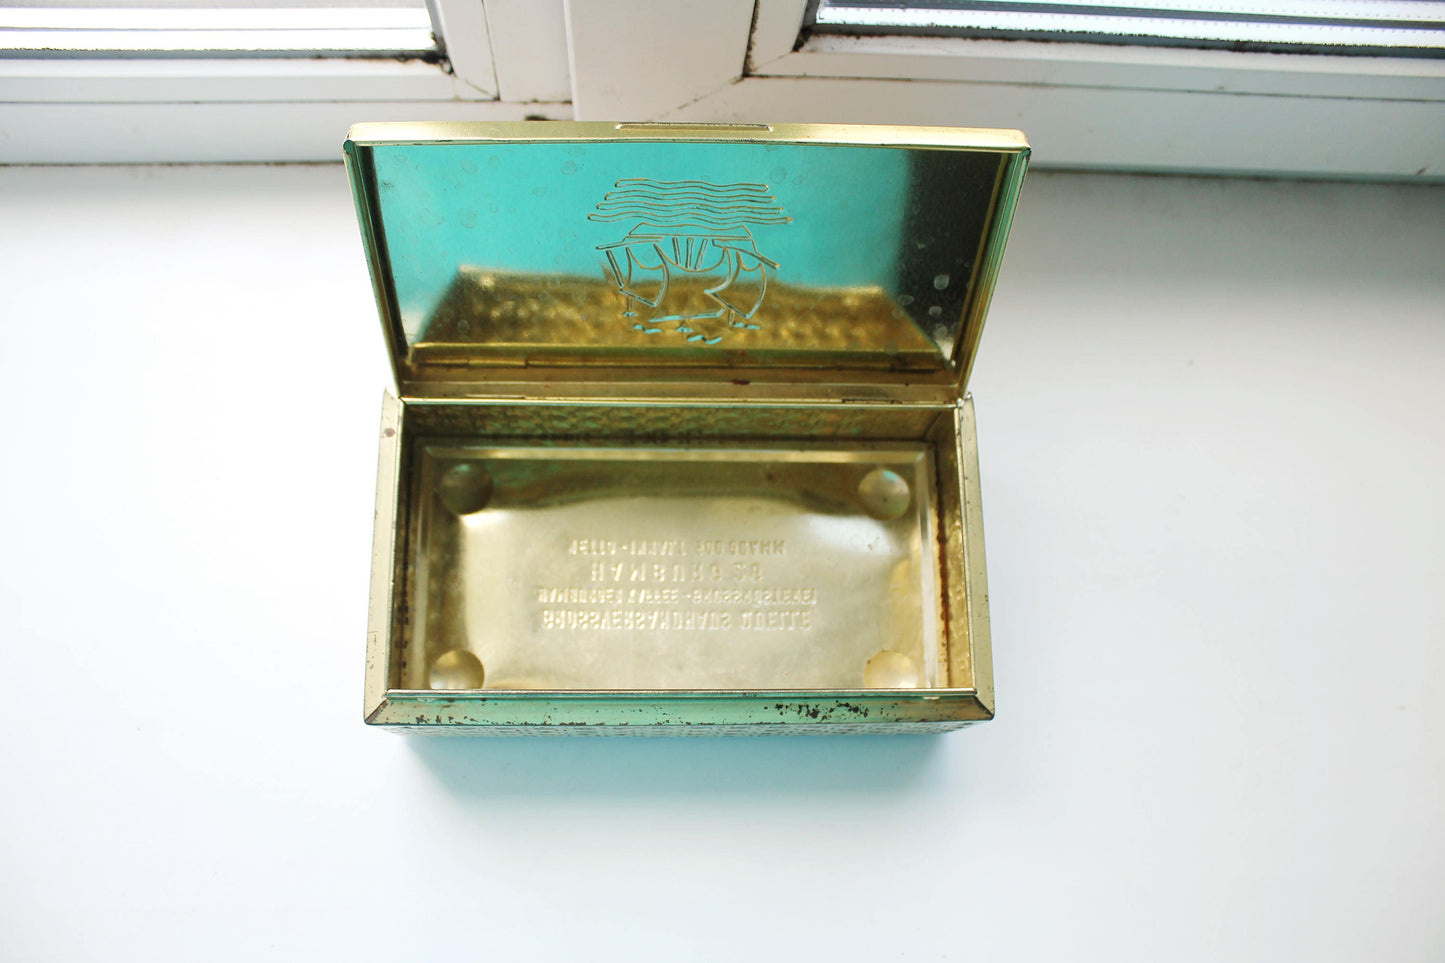 Vintage metall tin box for storing coffee - from Germany - 1970s